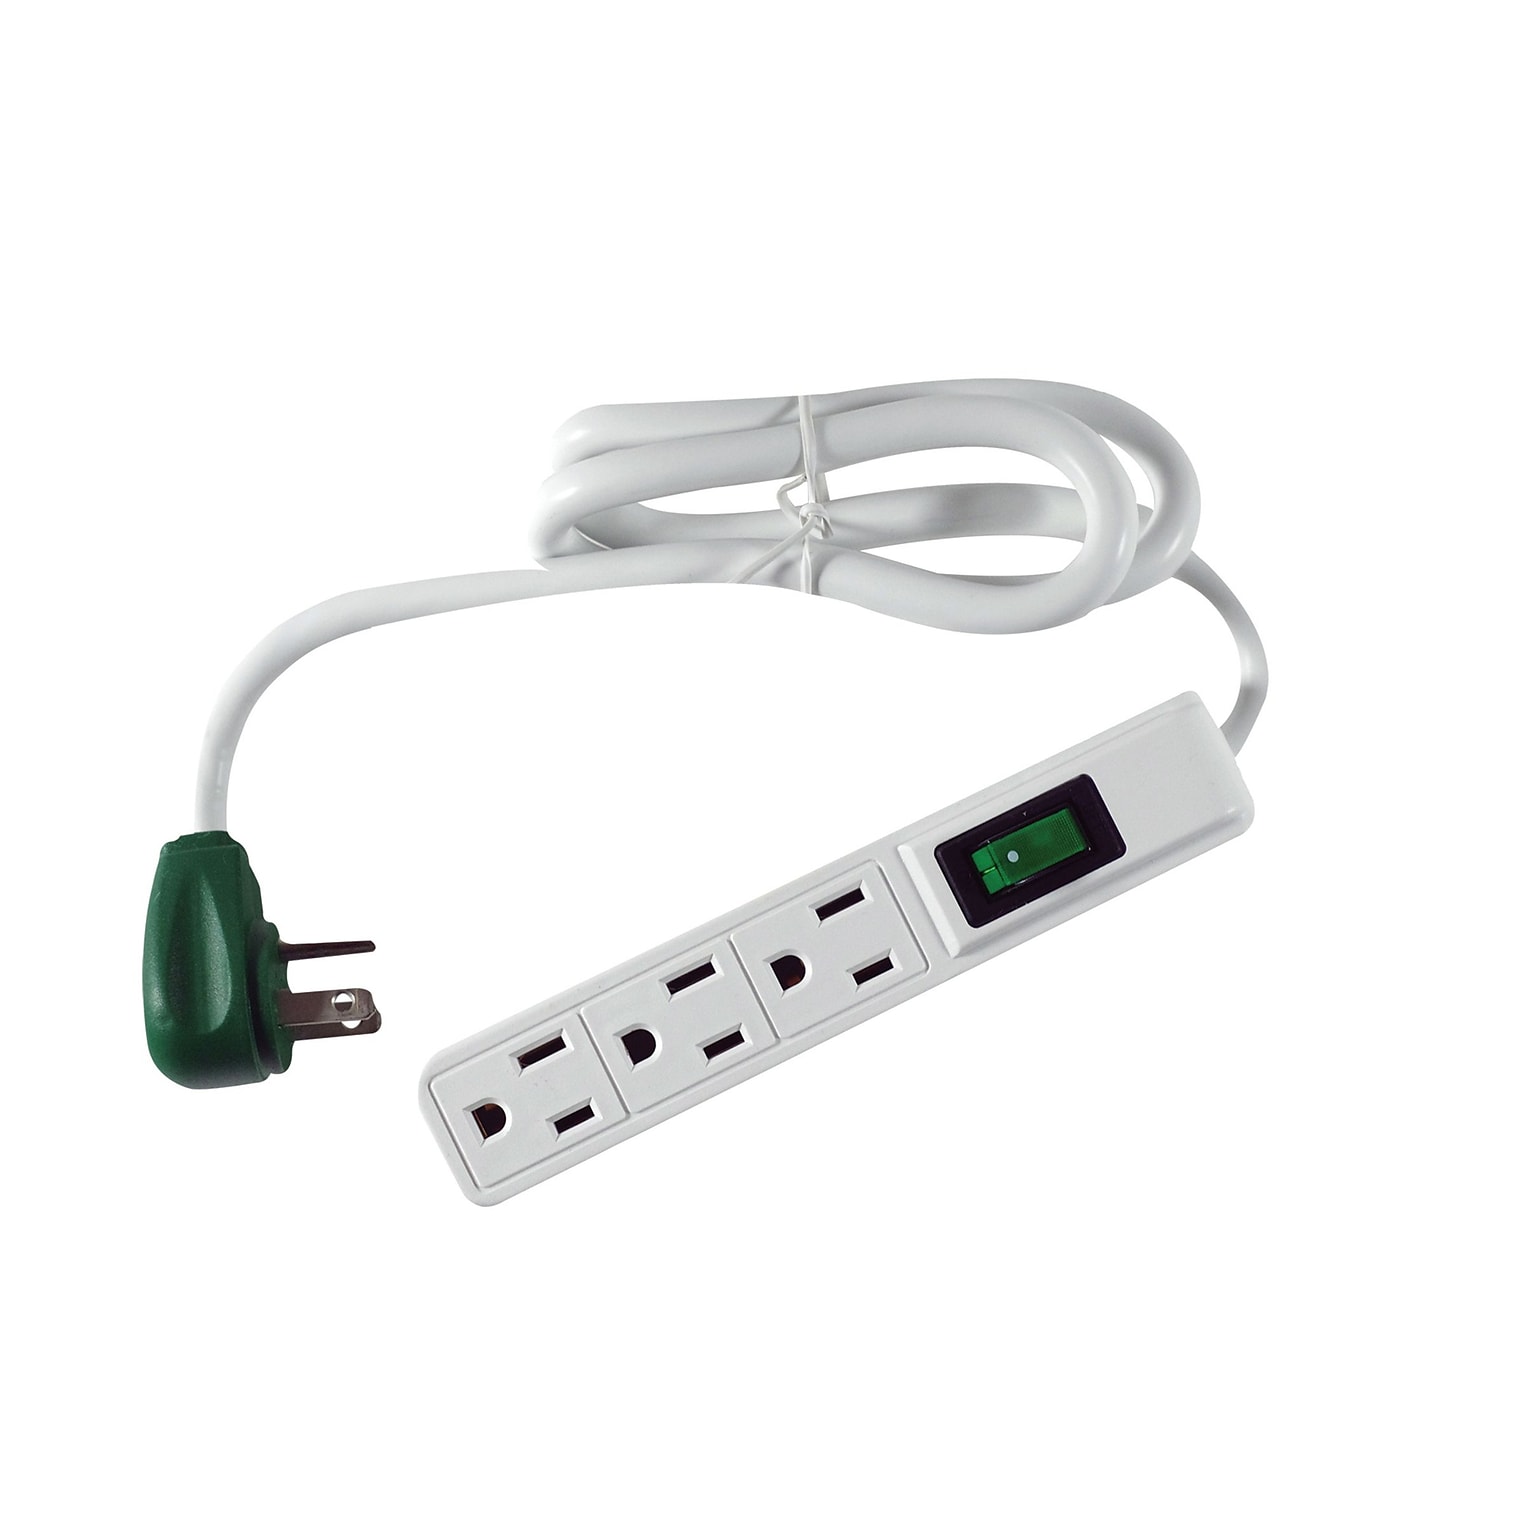 GoGreen Power Power Strip, 3 Outlet, White, 3/Pack (GG-13002MS)